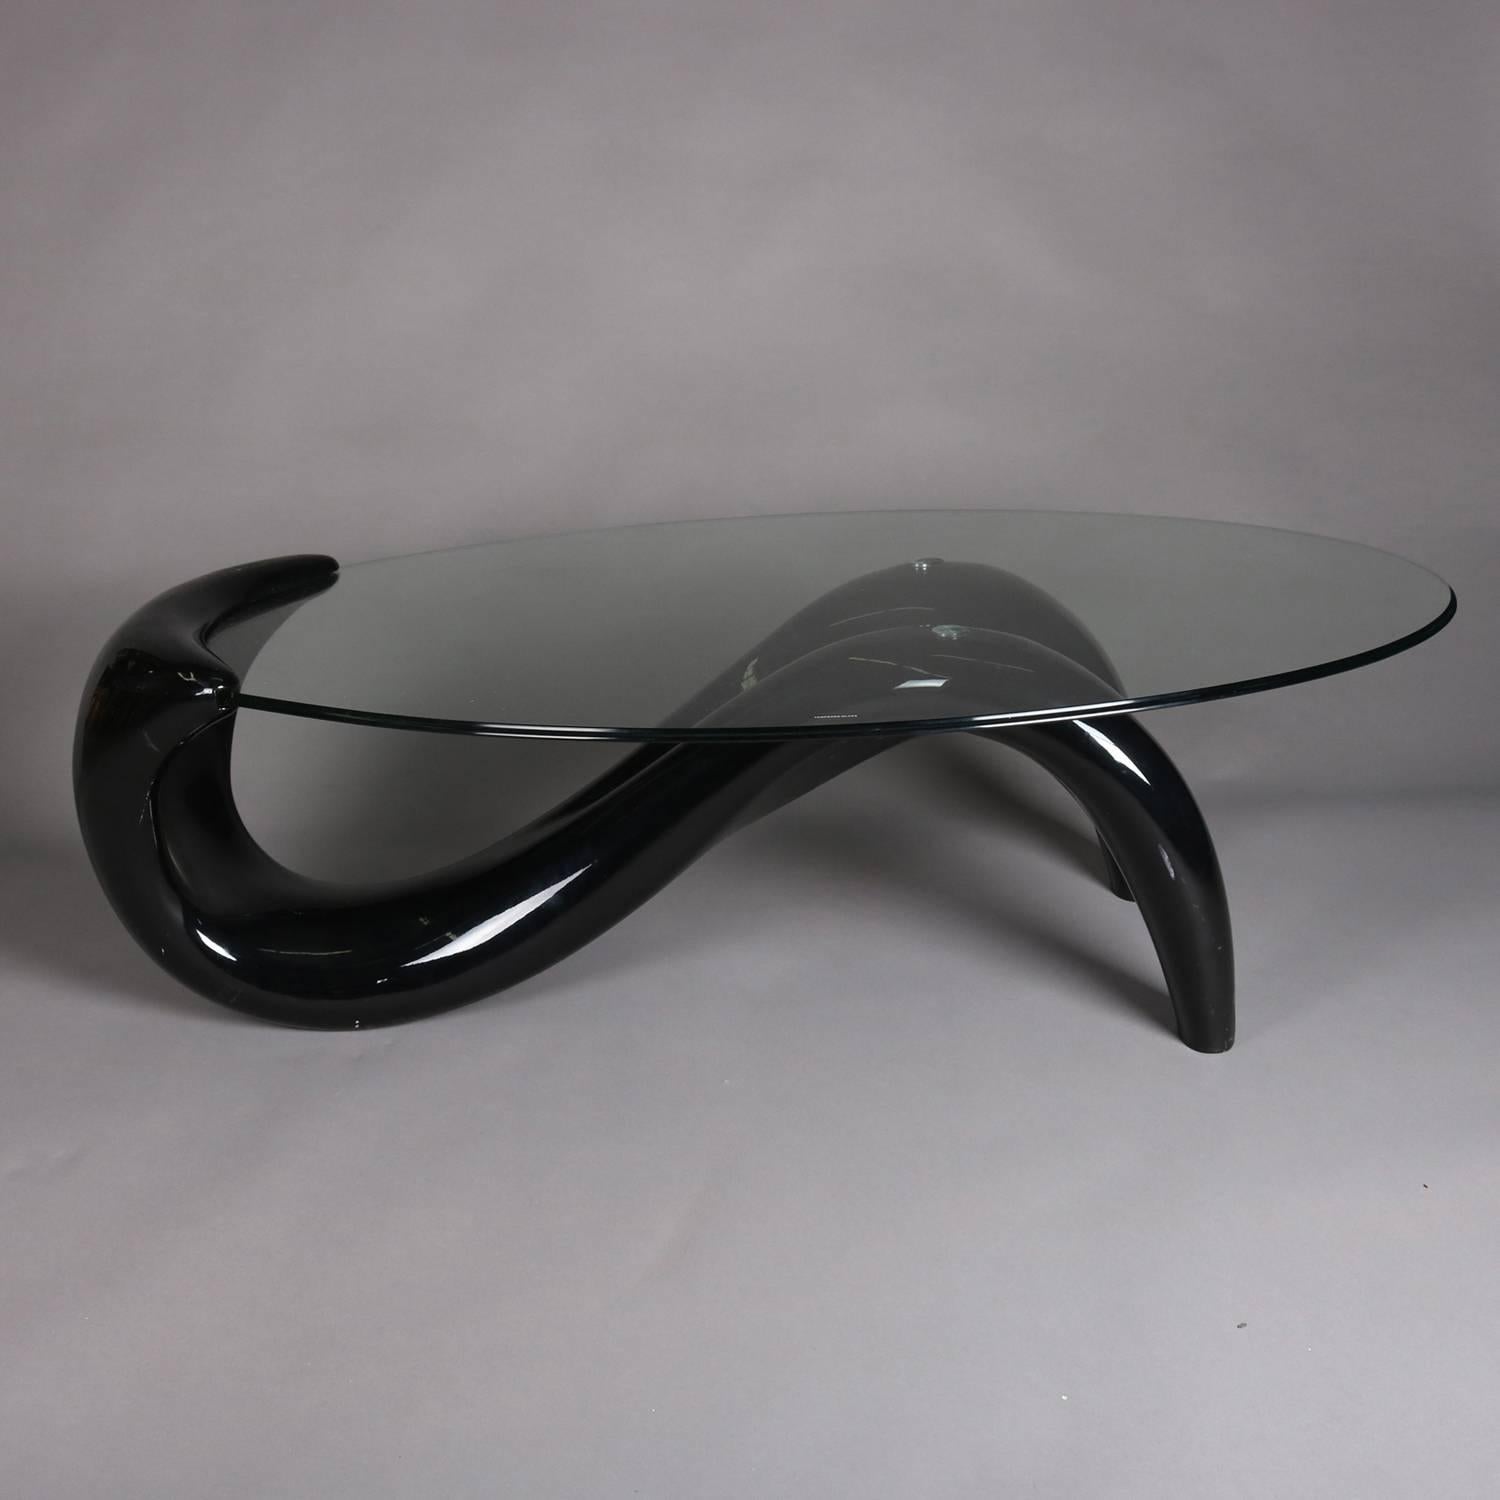 Mid Century Modern sculptural coffee table features abstract black taffy asymetrical base with heavy glass top, 20th century

Measures - 15.5